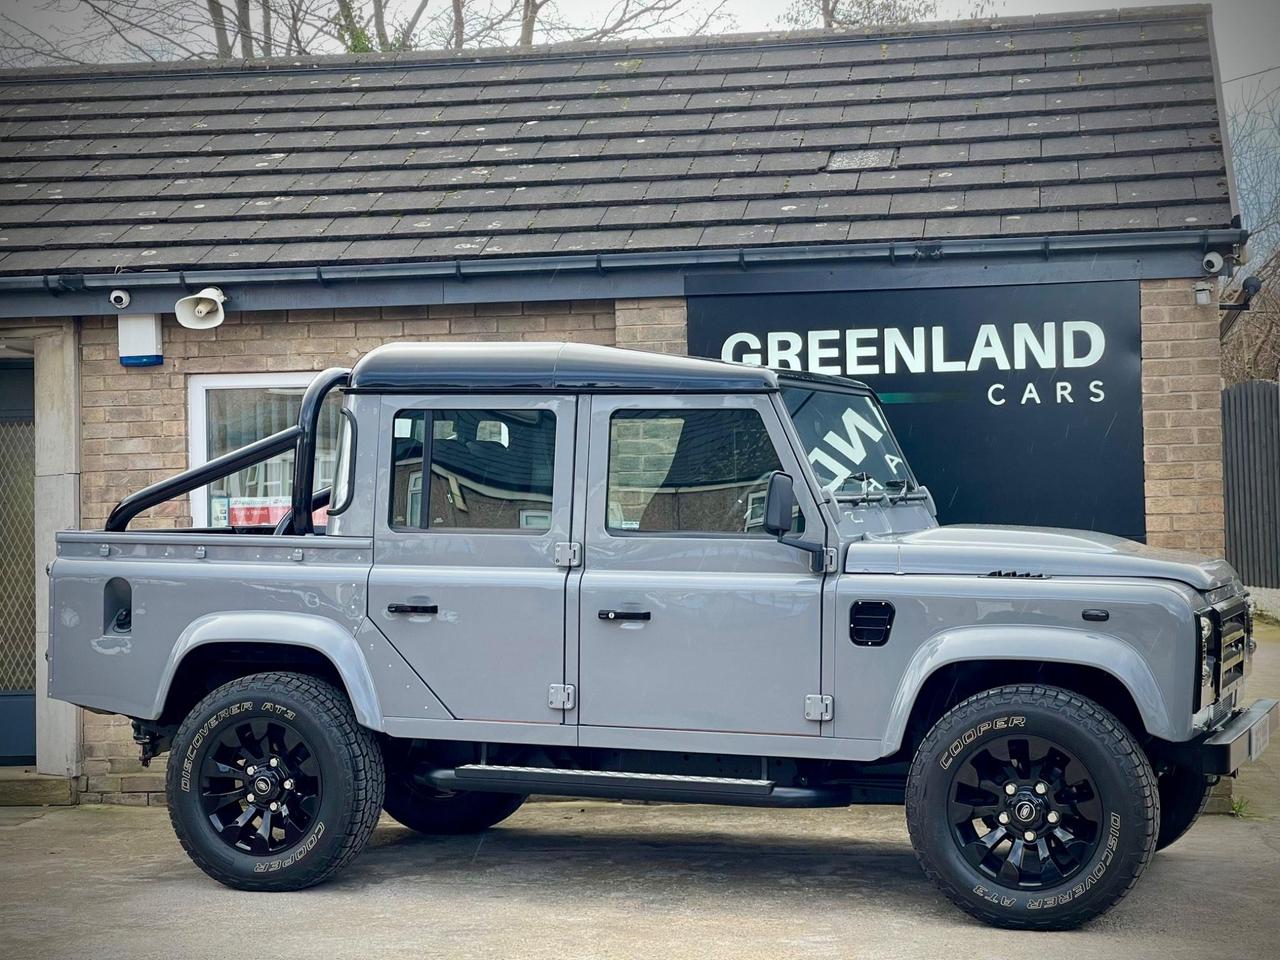 Used 2013 Land Rover Defender 110 for sale in Sheffield